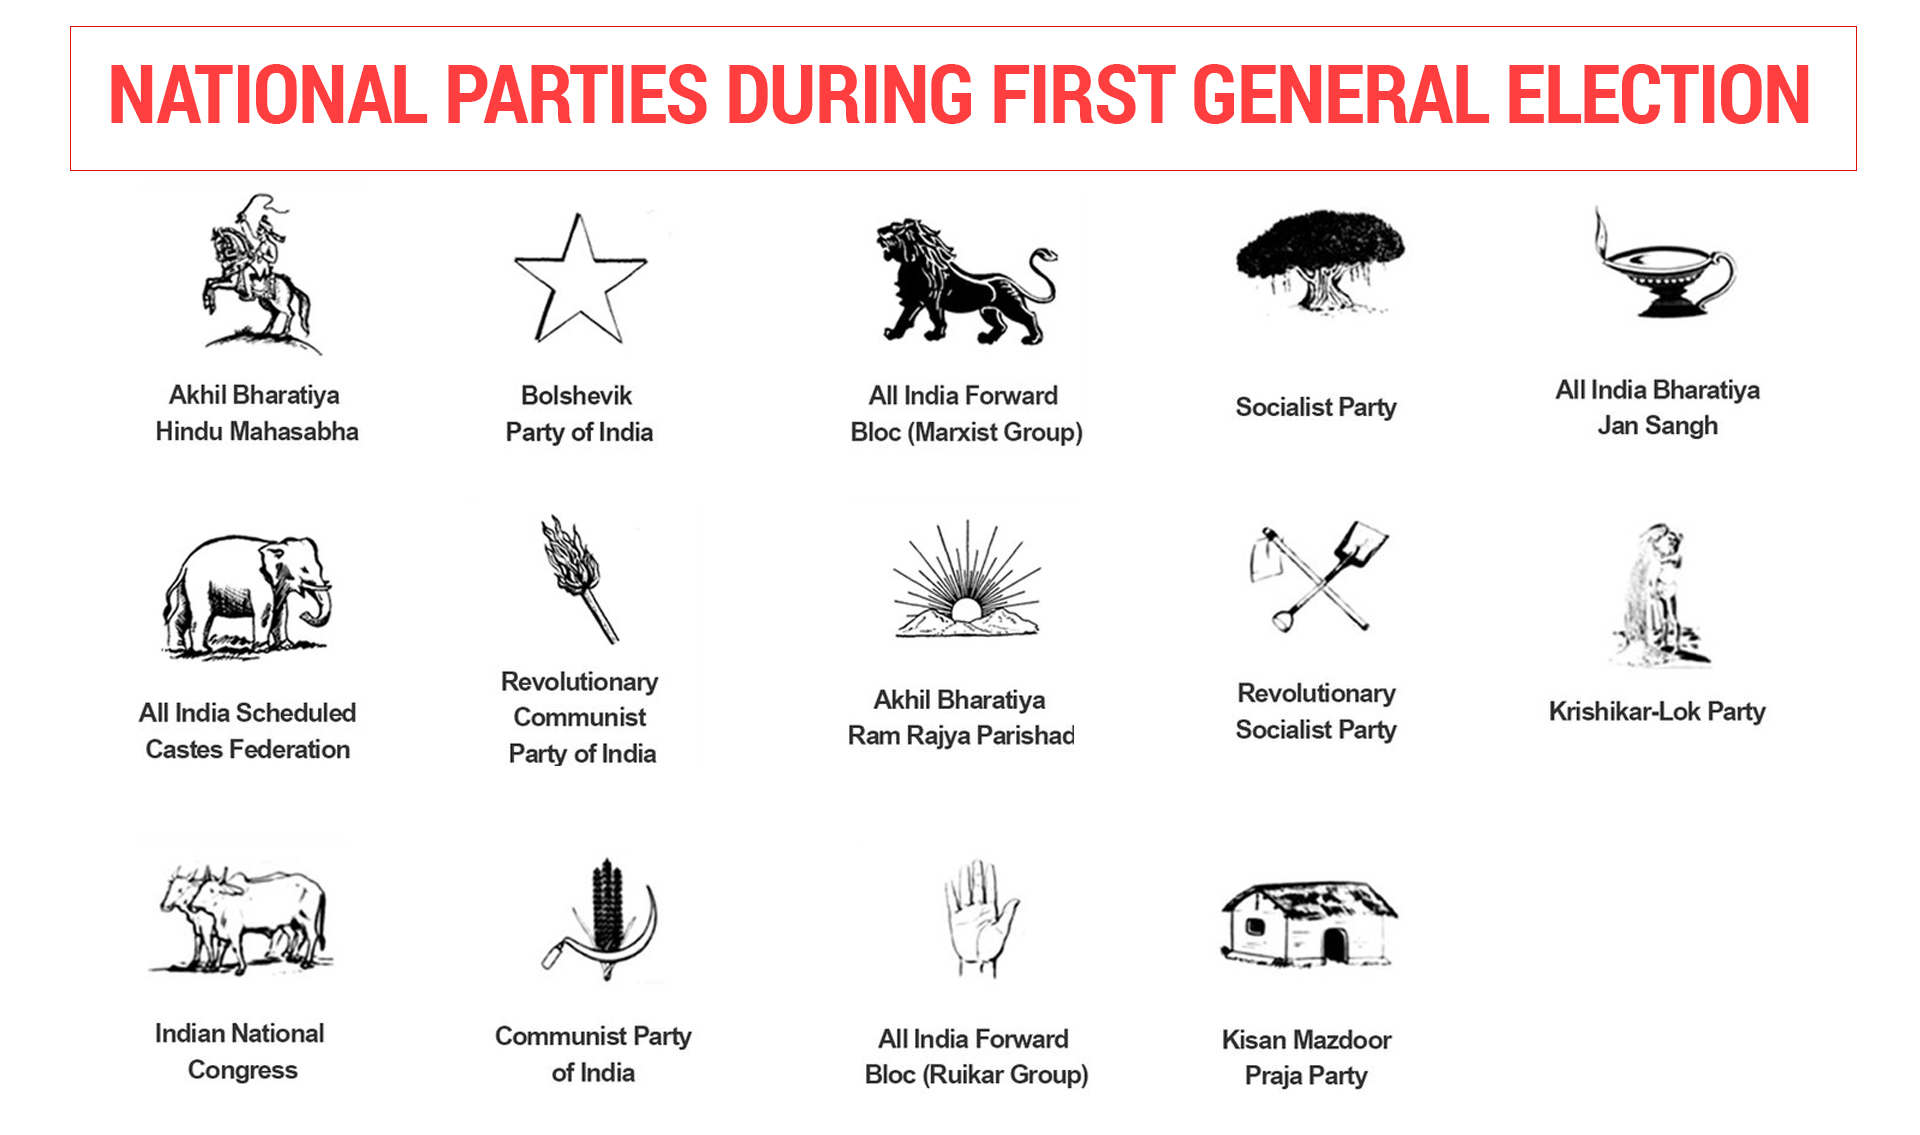 The 14 national parties during free India’s first election